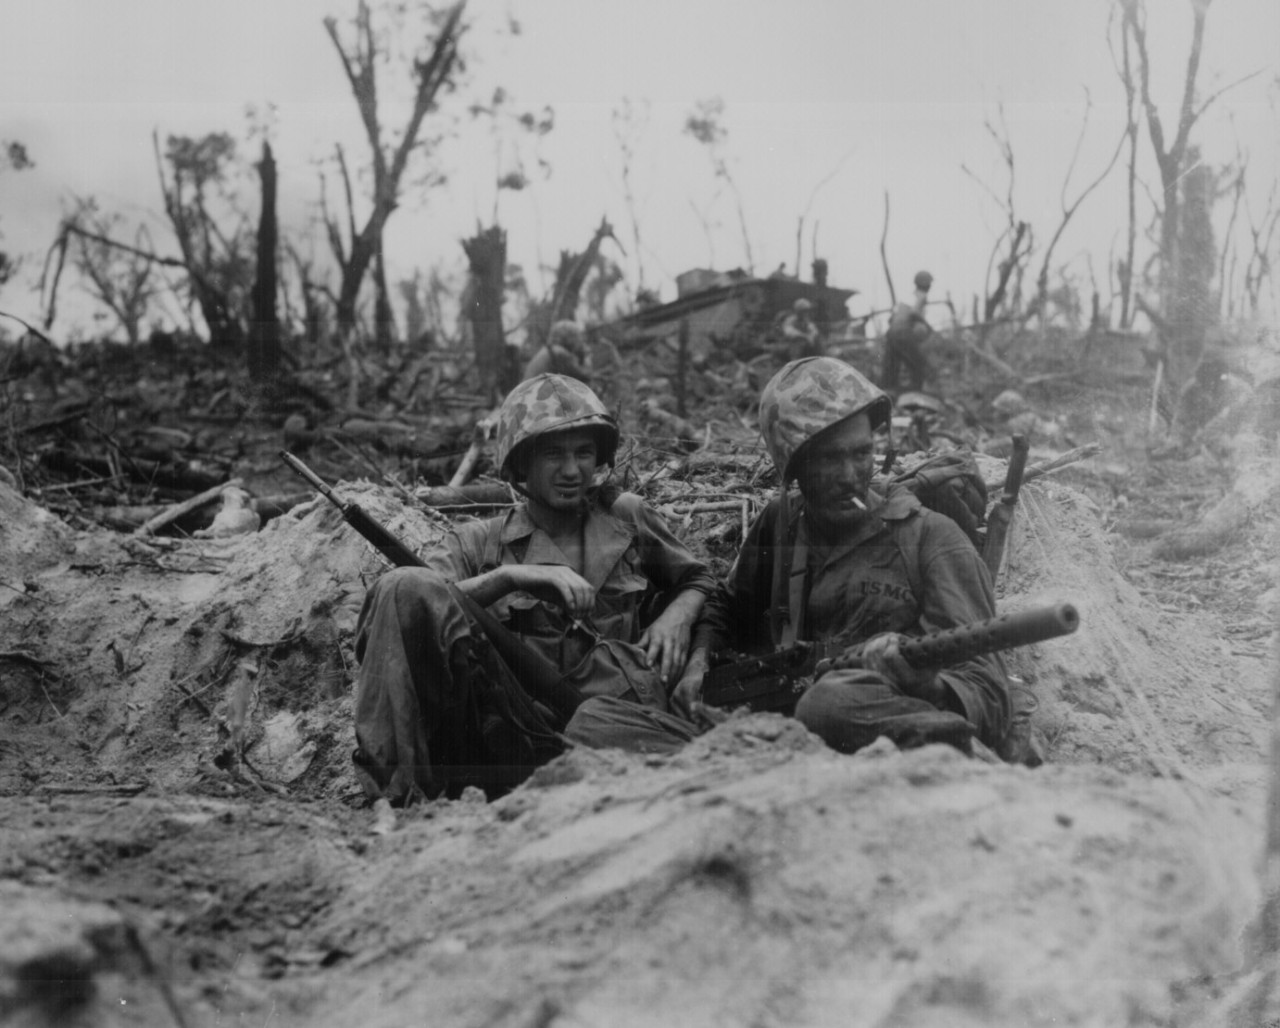 Marines take time out for a cigarette during the heavy fighting on Peleliu, September 1944 (127-N-97628).